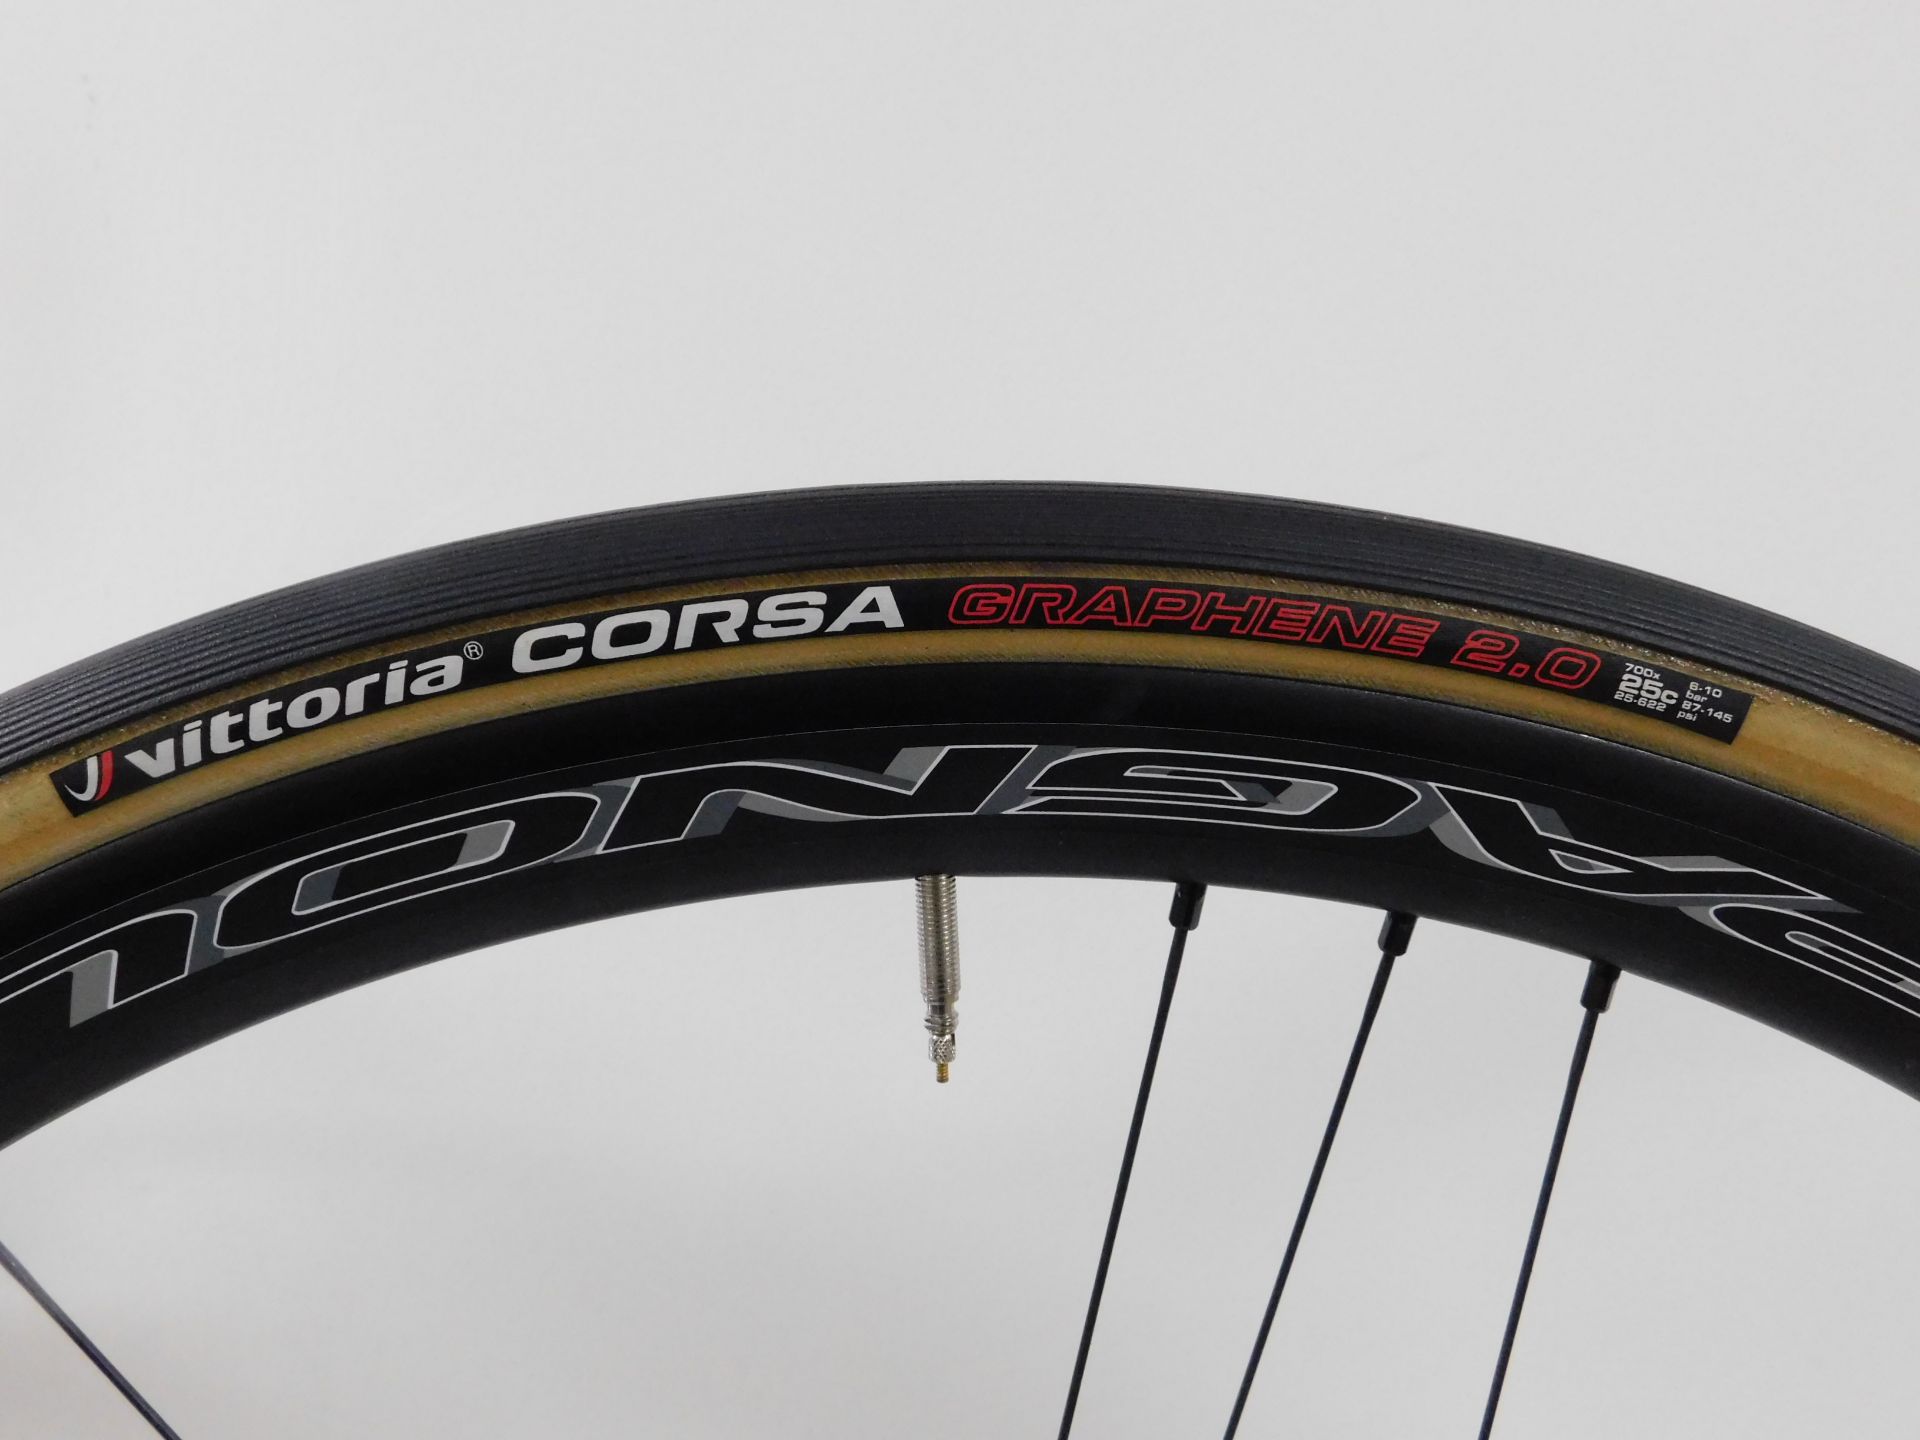 Pair Campagnolo “Scirocco” Wheels, 700c with Campagnolo Free Hub & Pair of Corsa Controls, 25c ( - Image 3 of 3